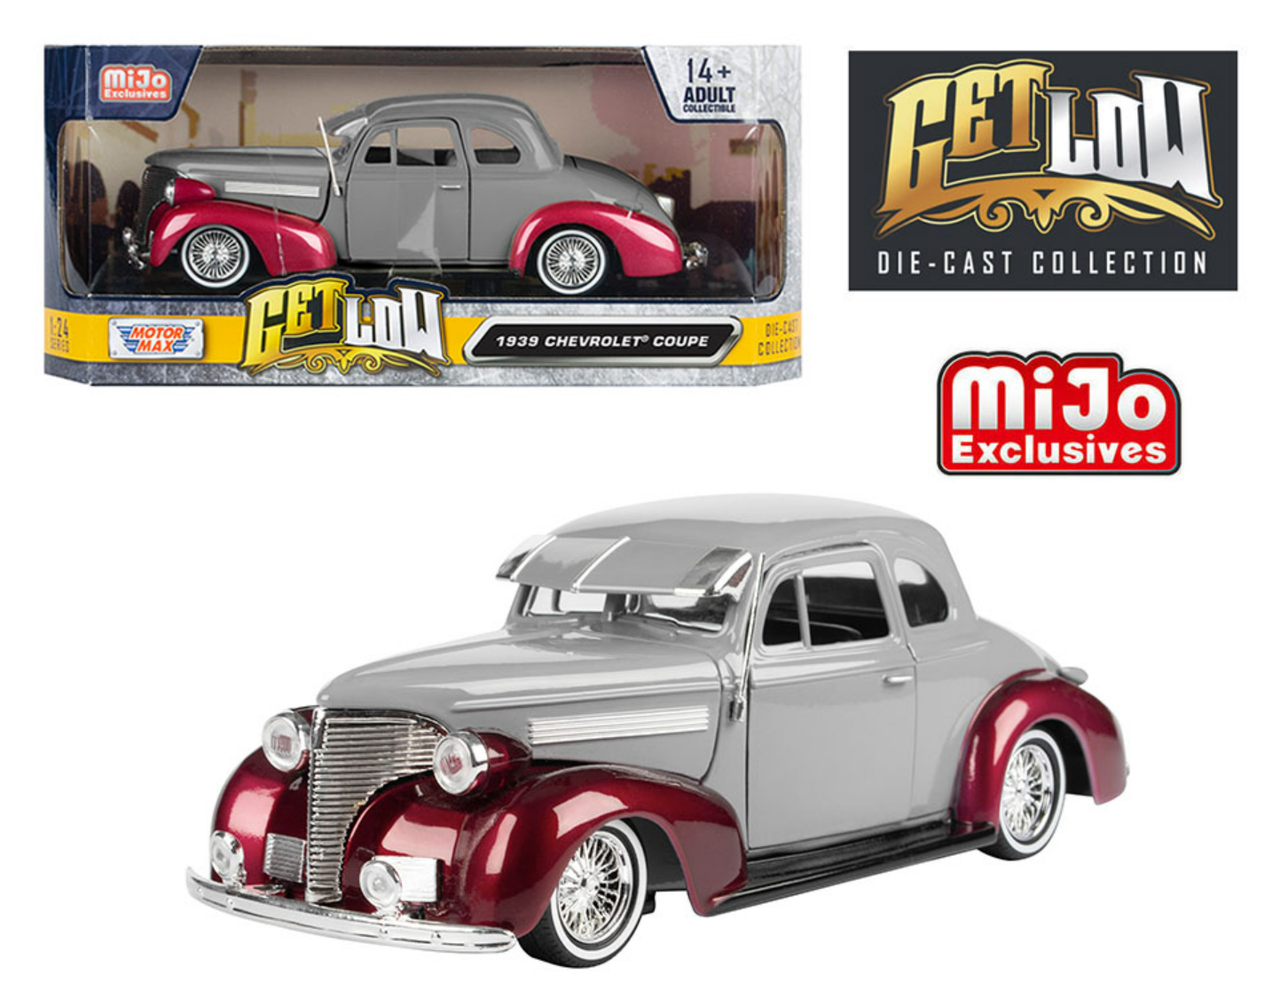 1/24 Motormax 1939 Chevrolet Coupe Lowrider (Grey & Red) Diecast Car Model